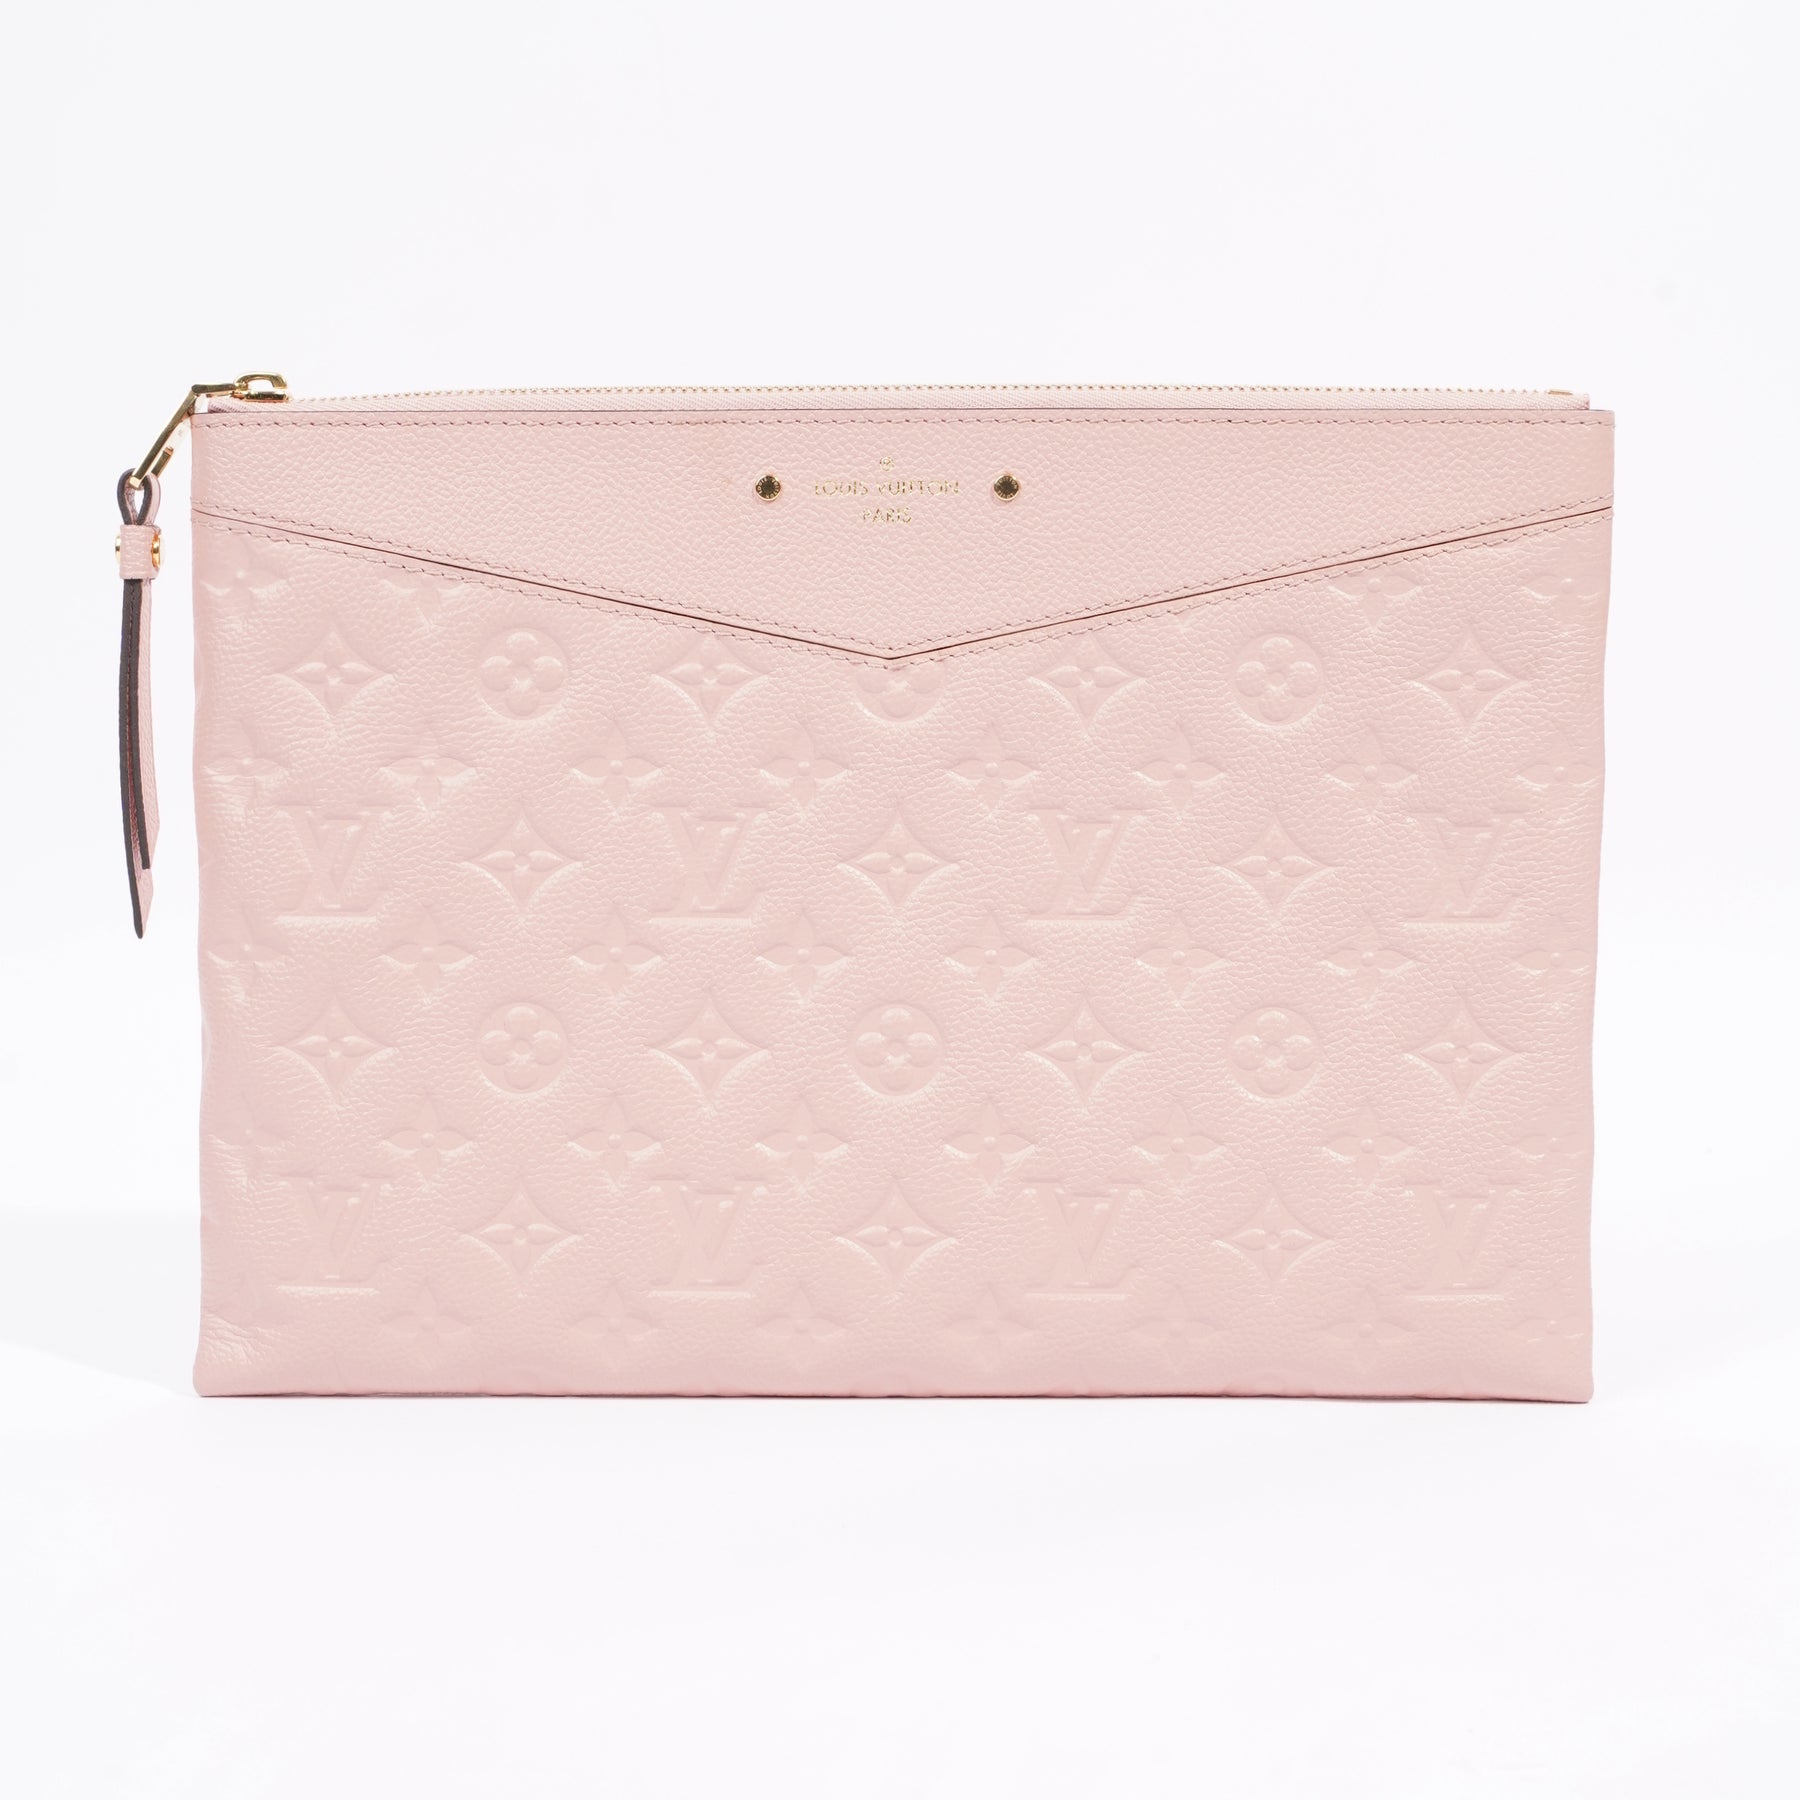 Louis Vuitton Womens Daily Pouch Pink Empreinte Leather – Luxe